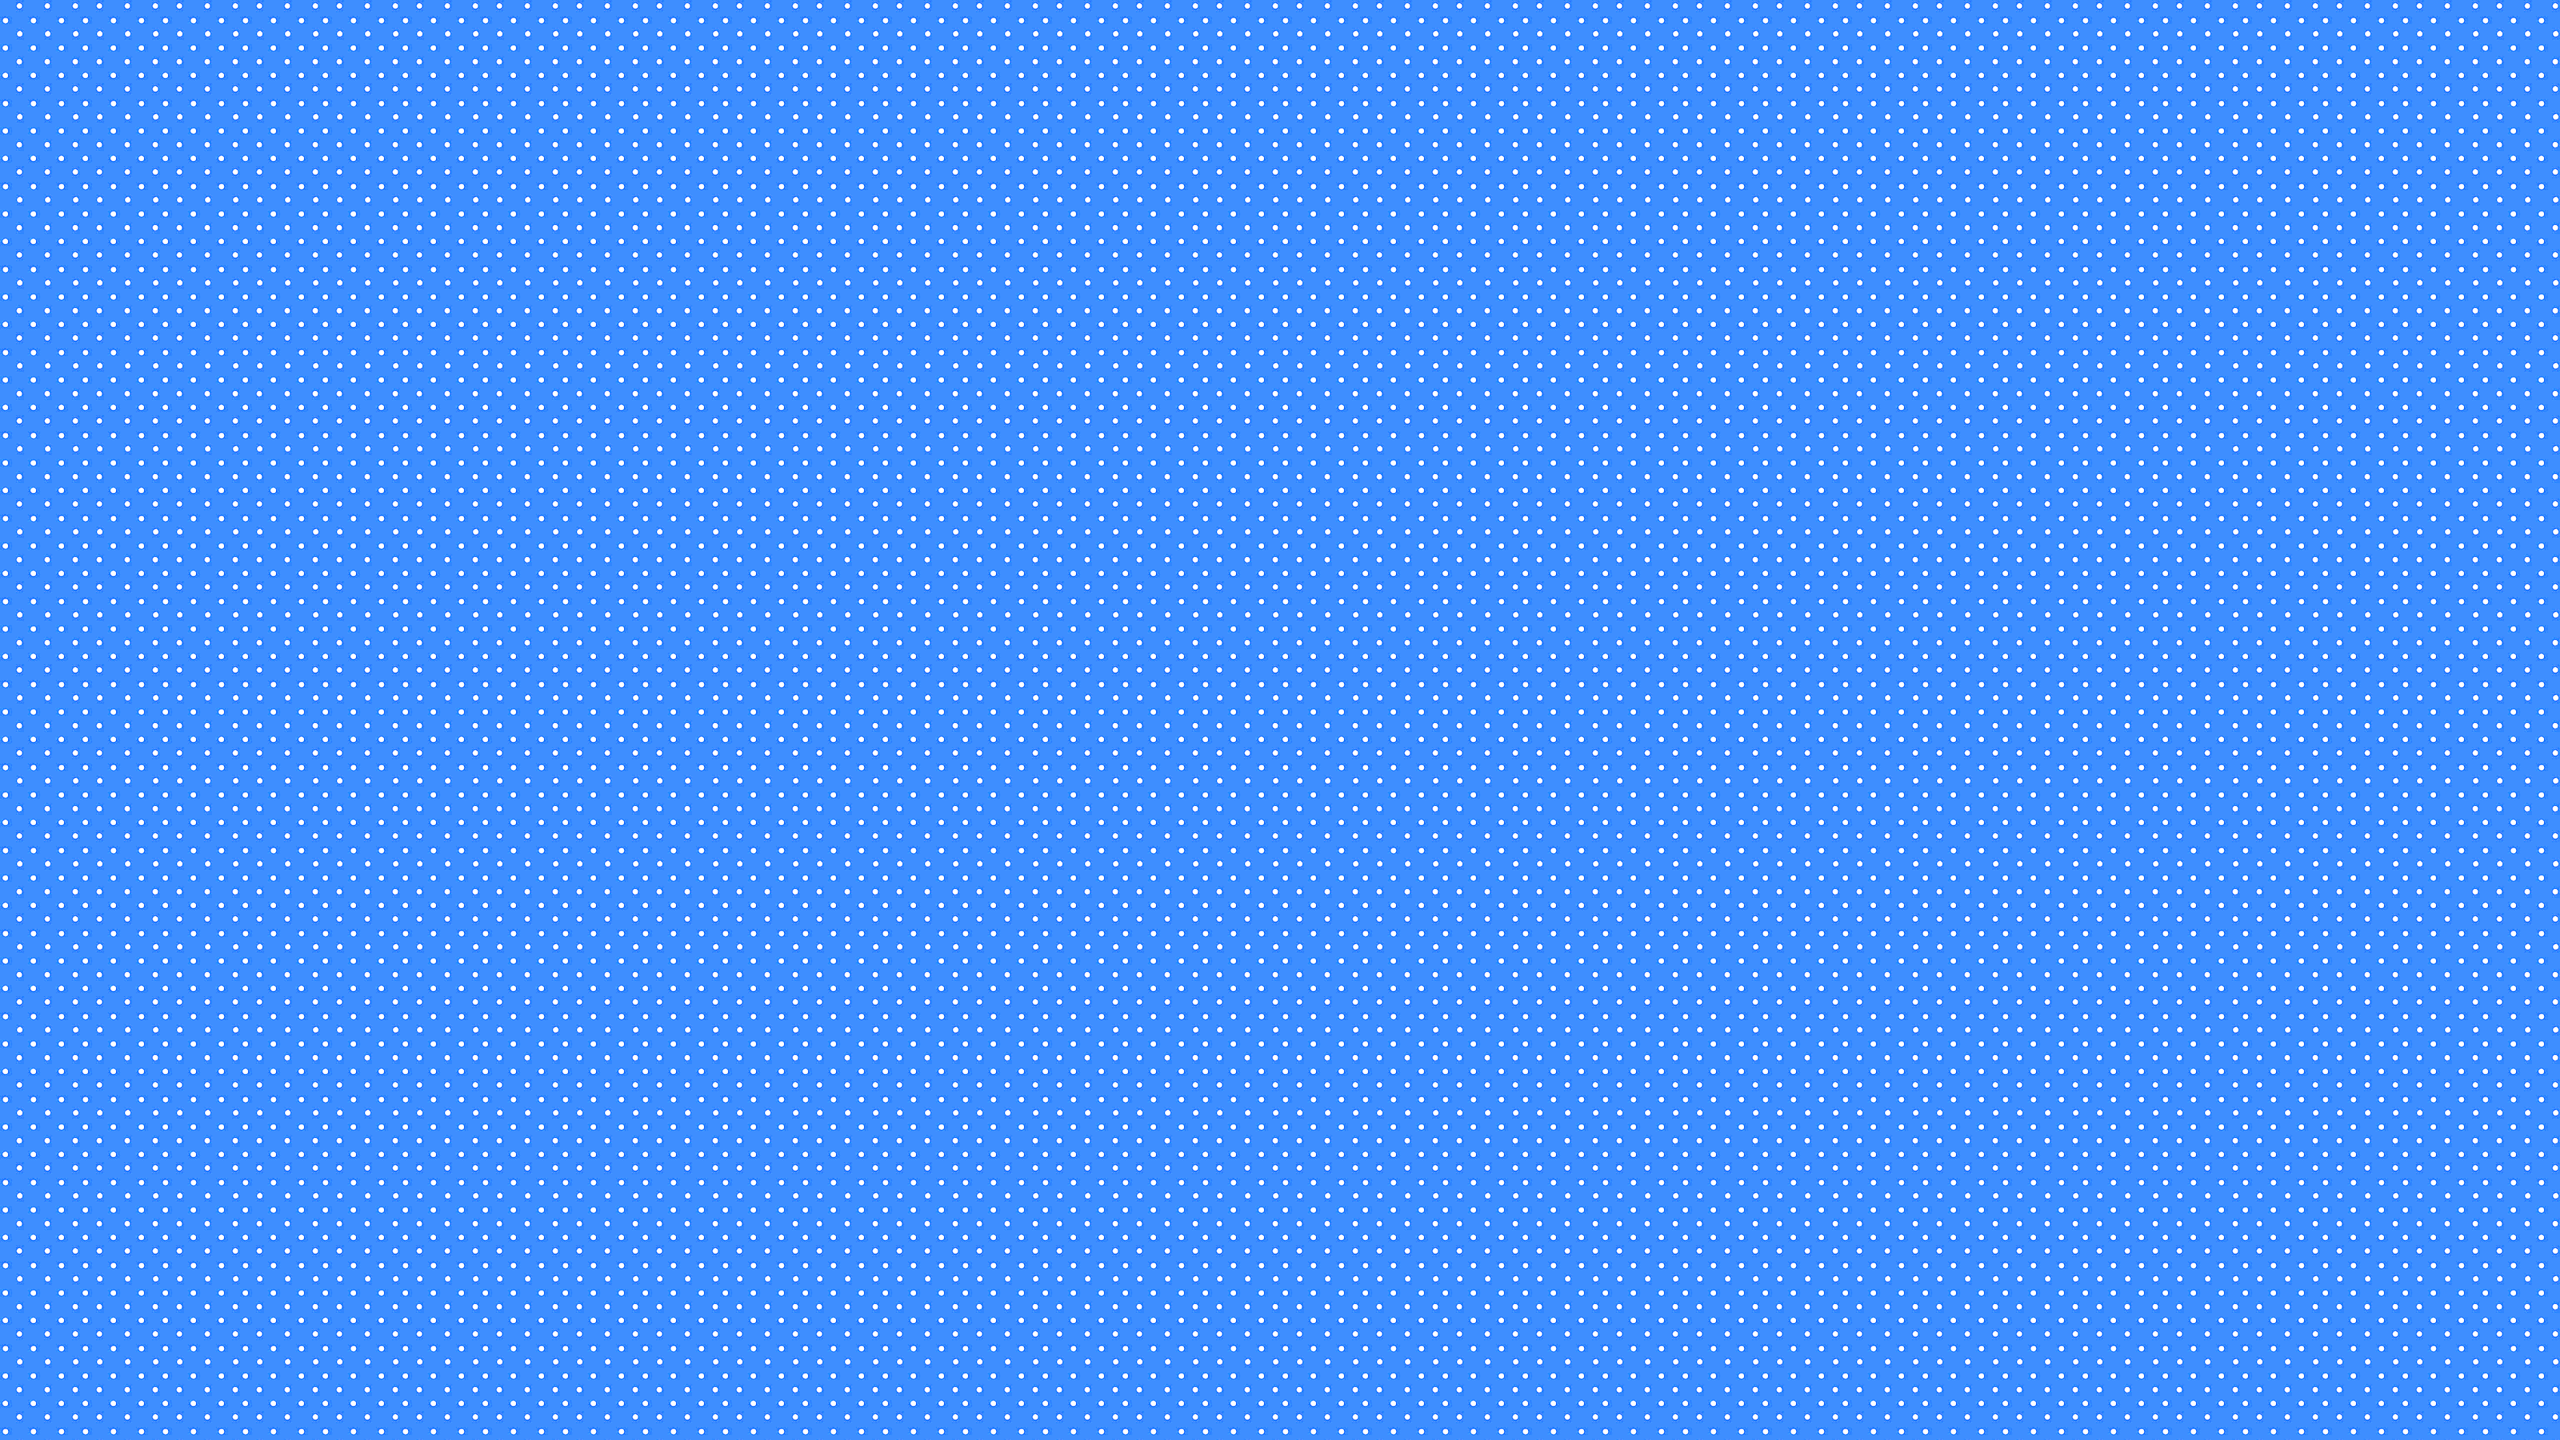 Blue Polka Dots Desktop Wallpaper Is Easy Just Save The